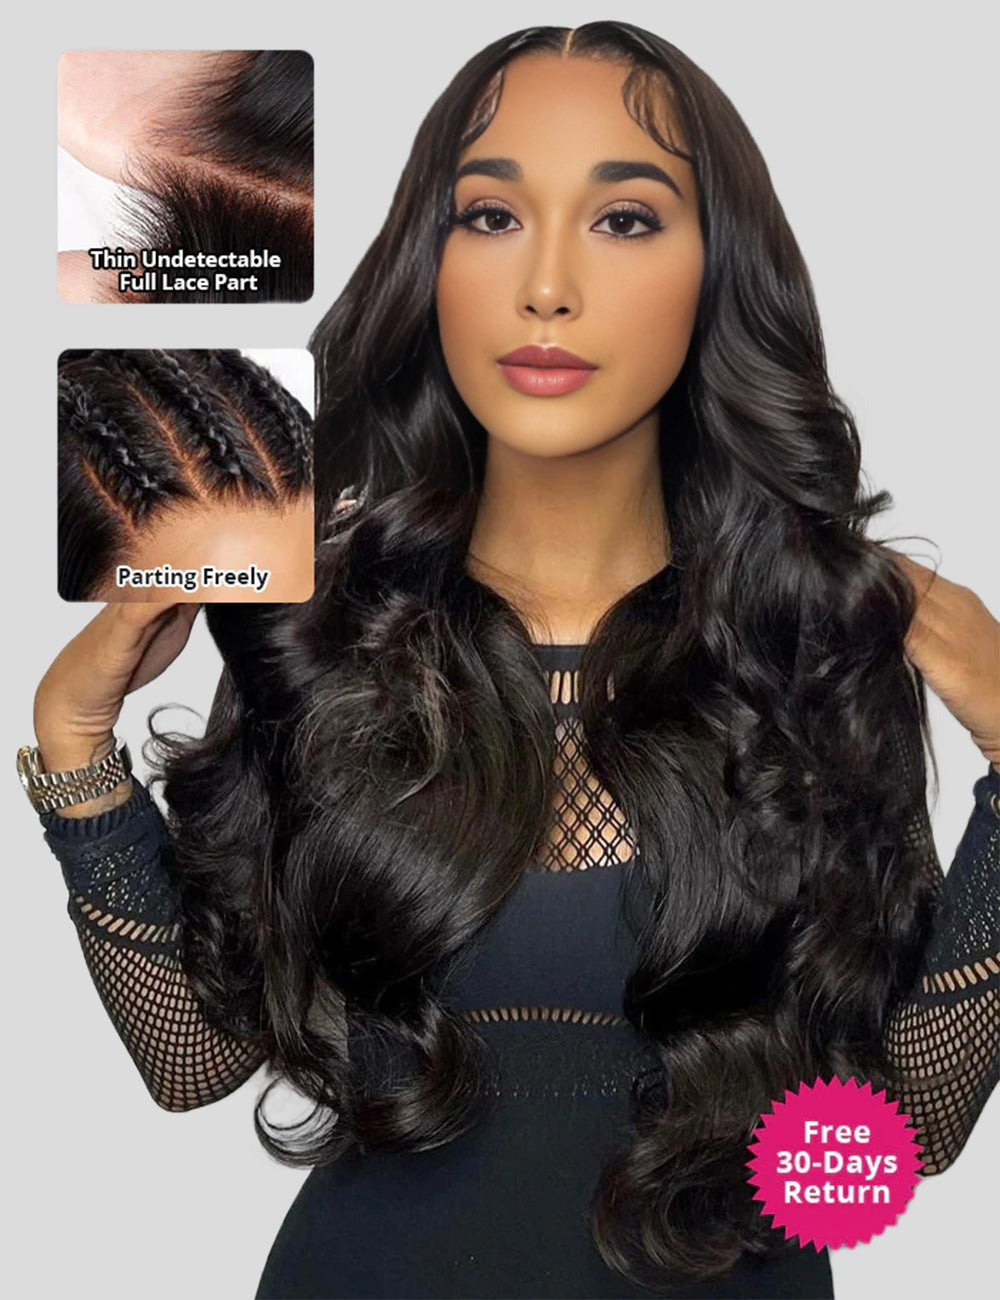 Full Lace Human Hair Wigs Body Wave 360 Full Lace Front Wigs With Baby Hair